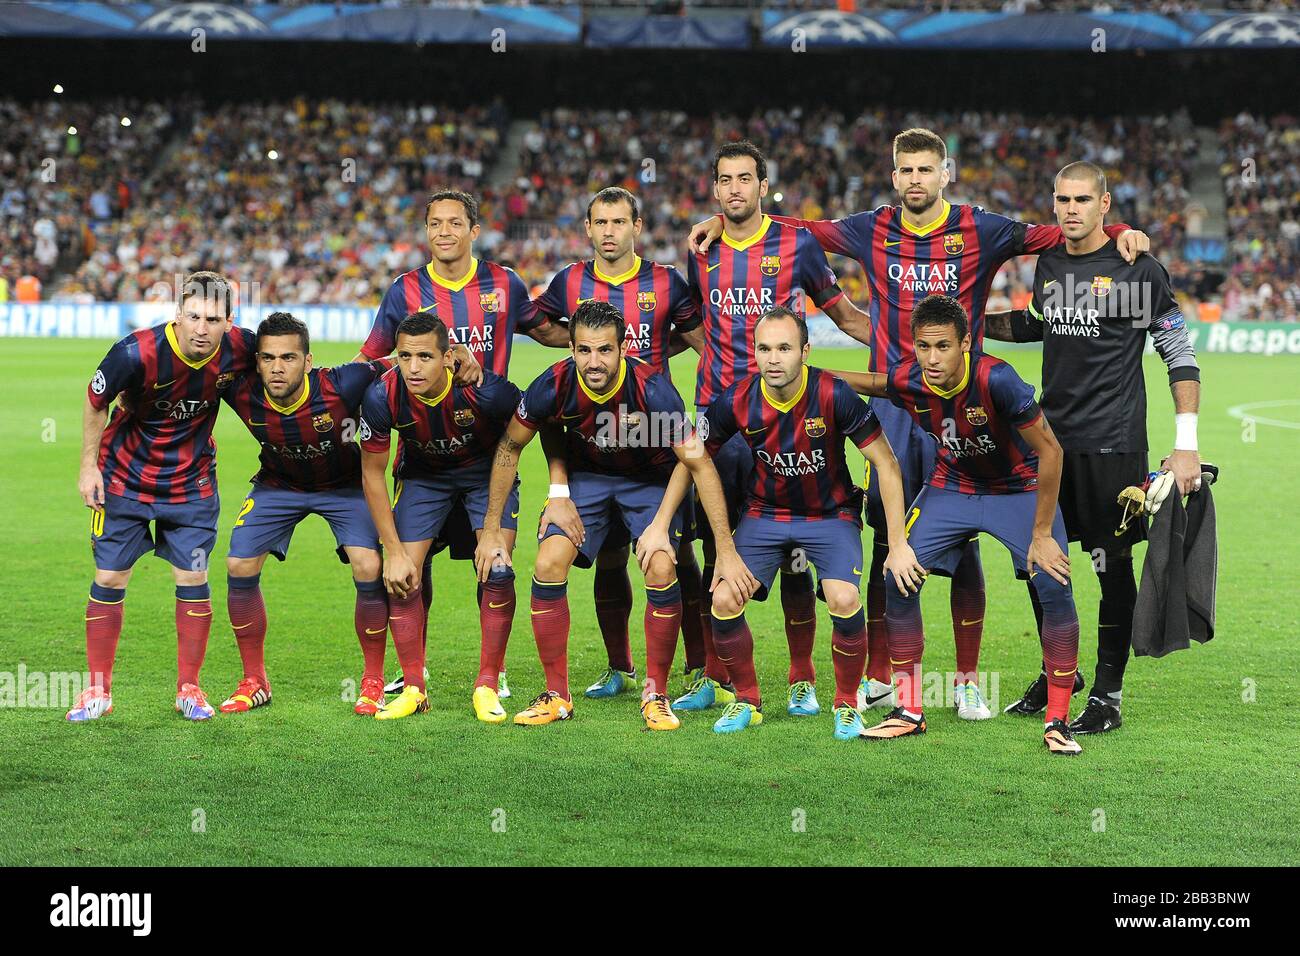 Barcelona team group pose for a photograph Stock Photo